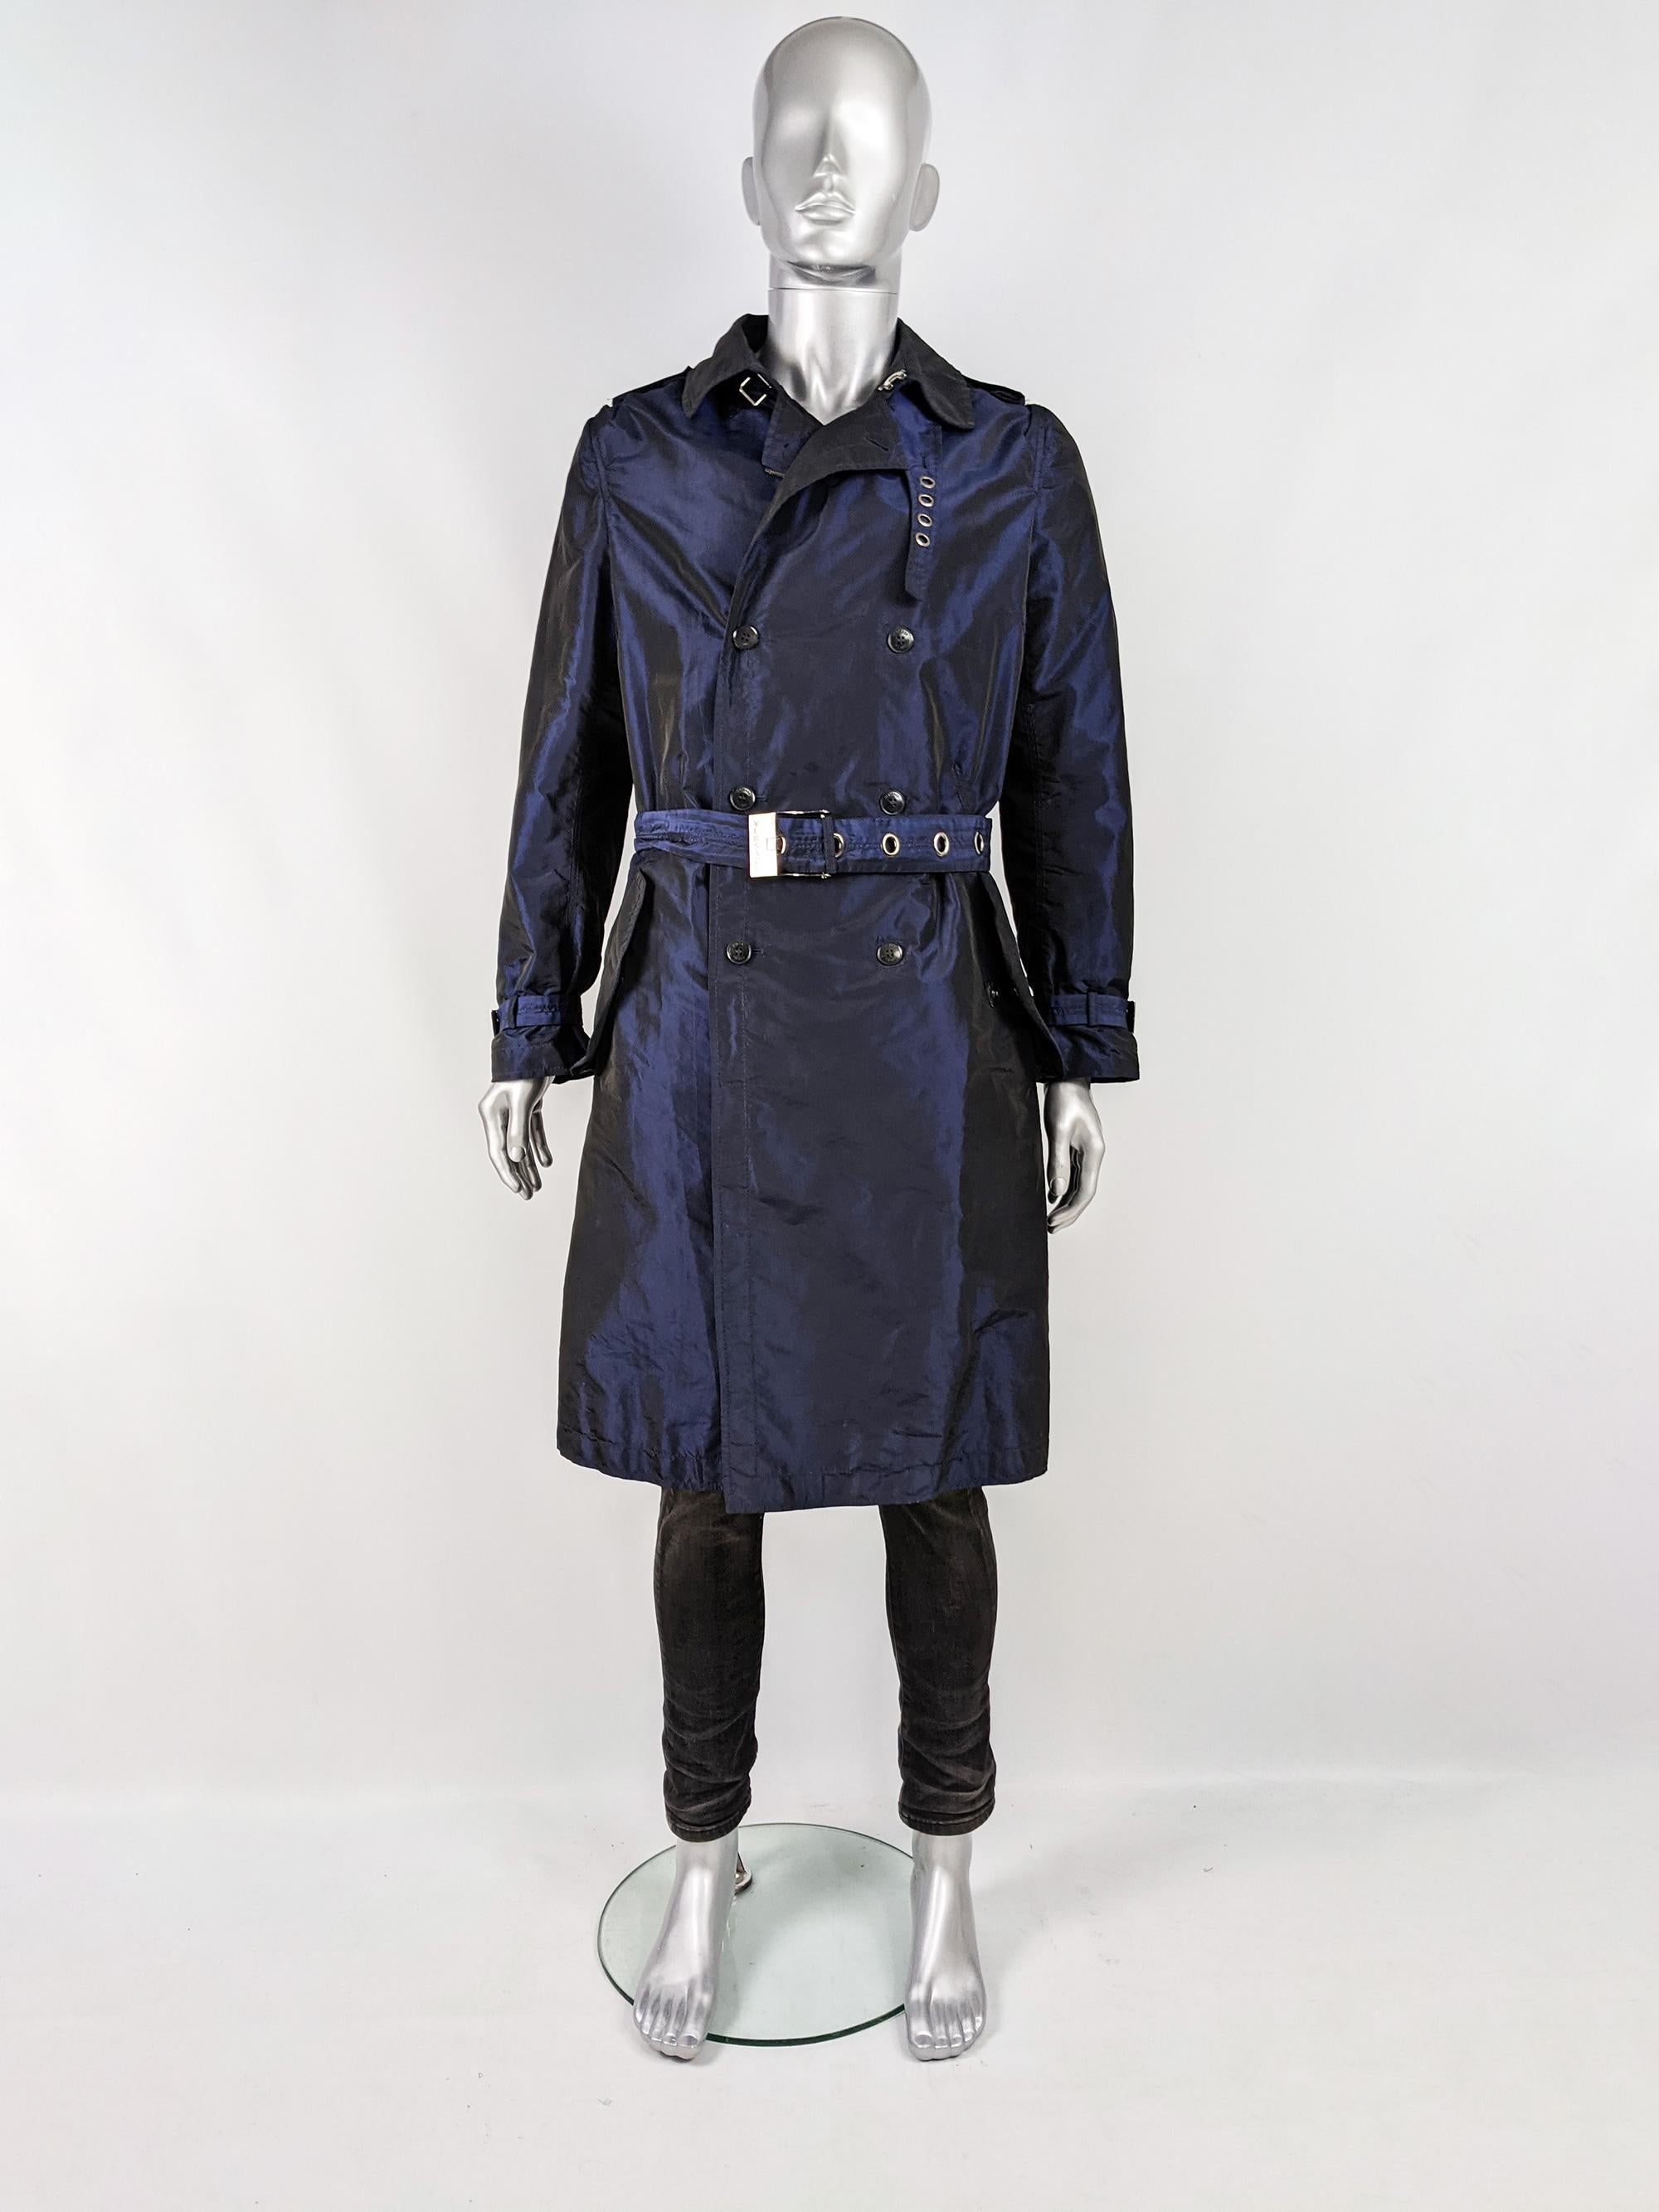 An incredible mens Versace trenchcoat in a blue iridescent taffeta fabric with amazing details like the large Versace engraved belt buckle (that can also be tied in the back), the collar strap details, leather tab to the back and concealed zip